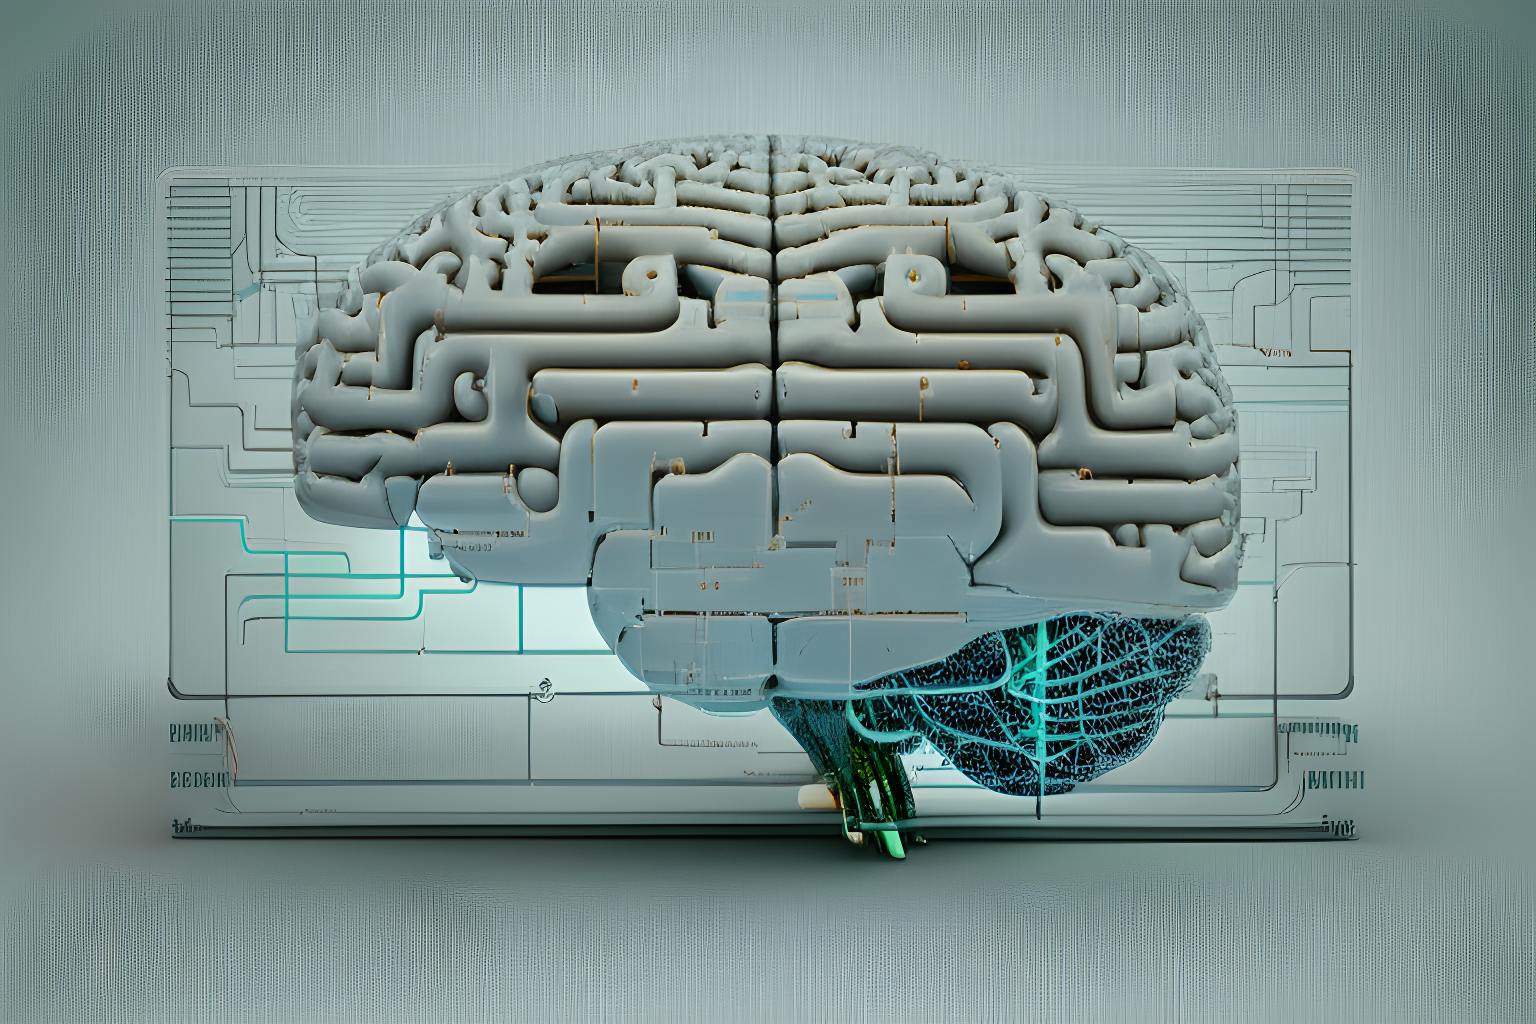 /neuralink-takes-on-human-brains-28percent-of-users-express-ethical-concerns feature image